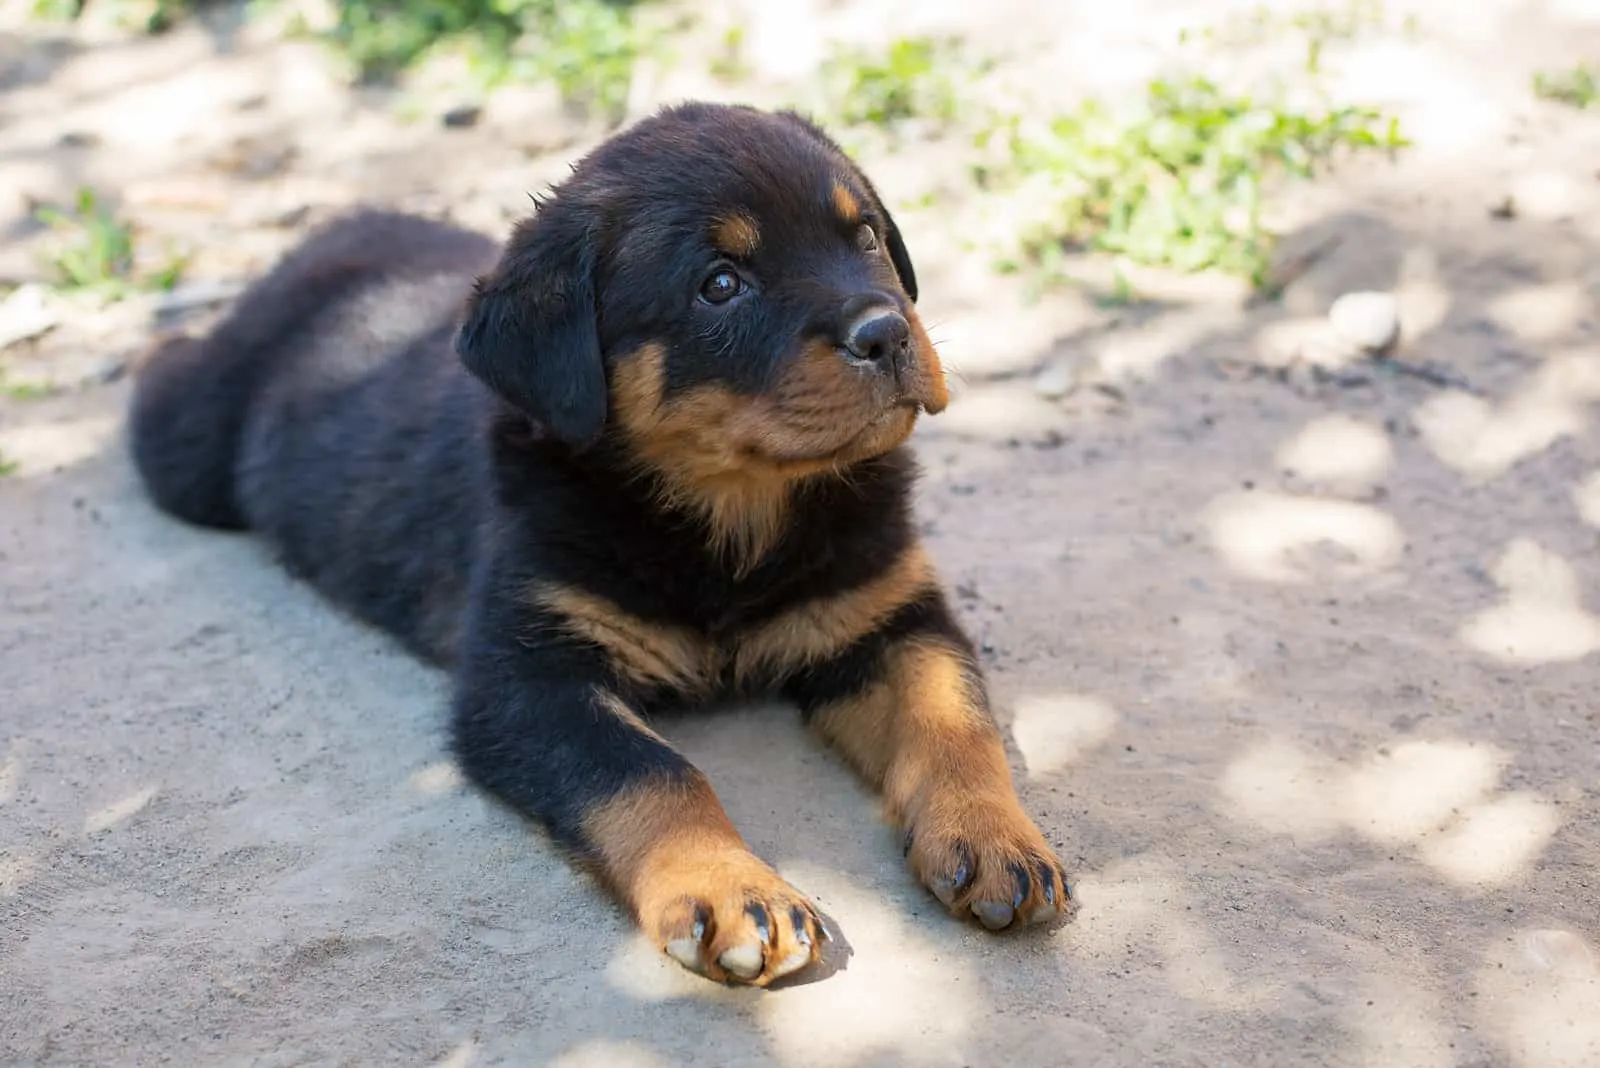 Rottweiler lay down and looked around